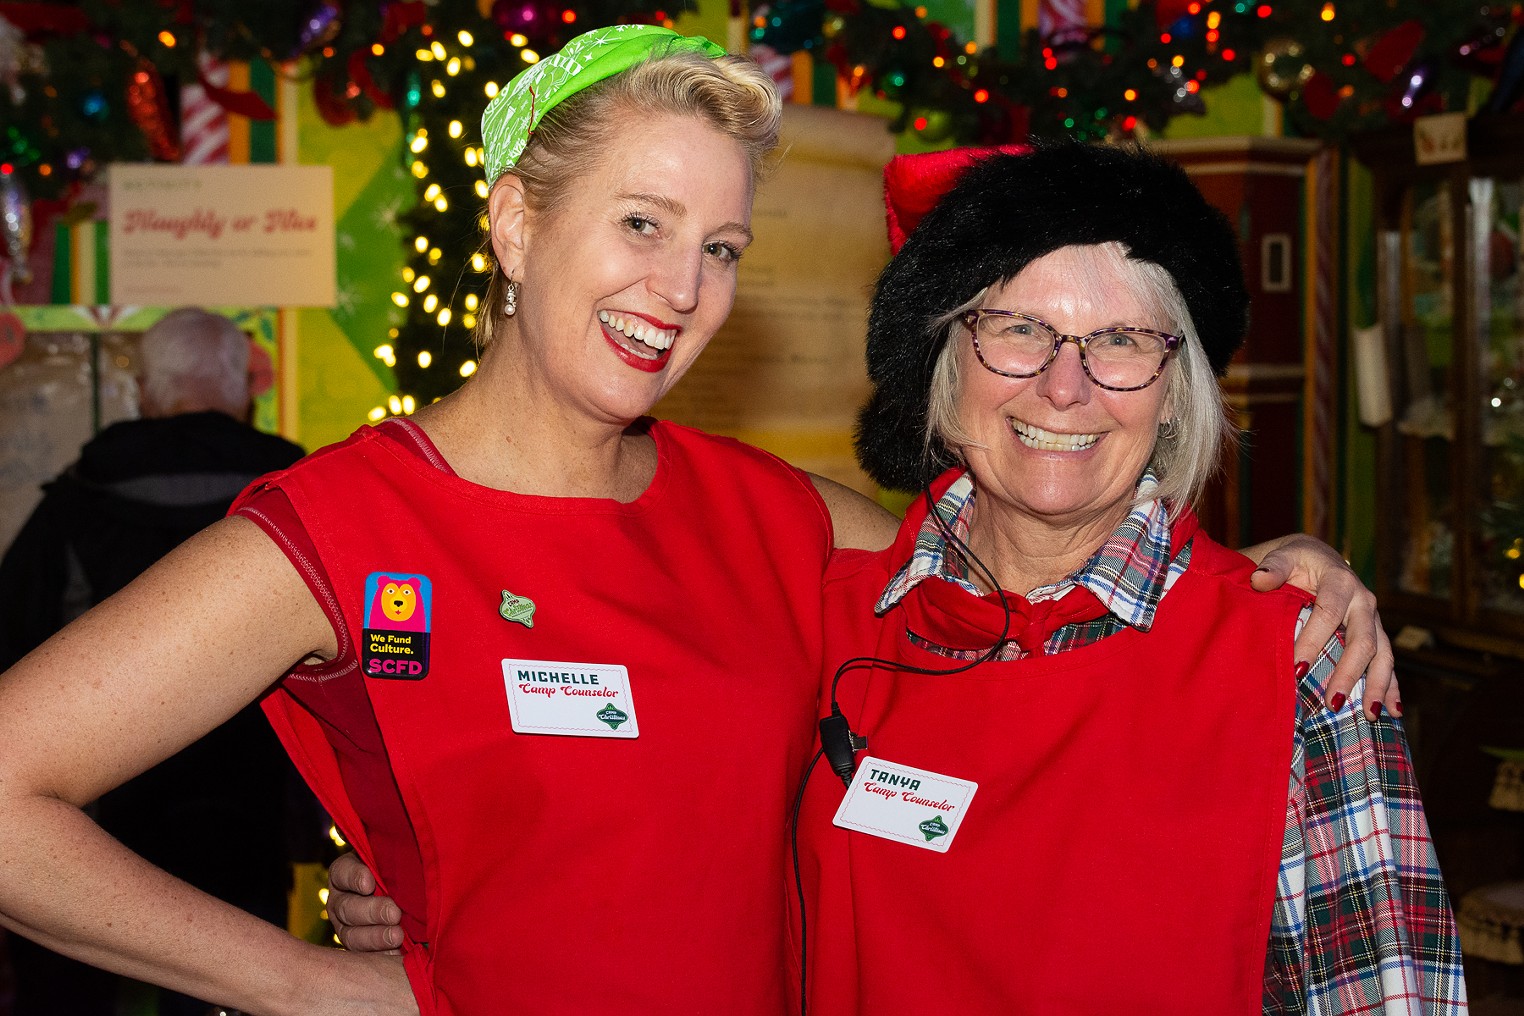 Camp Christmas at Stanley Marketplace is a daring work of